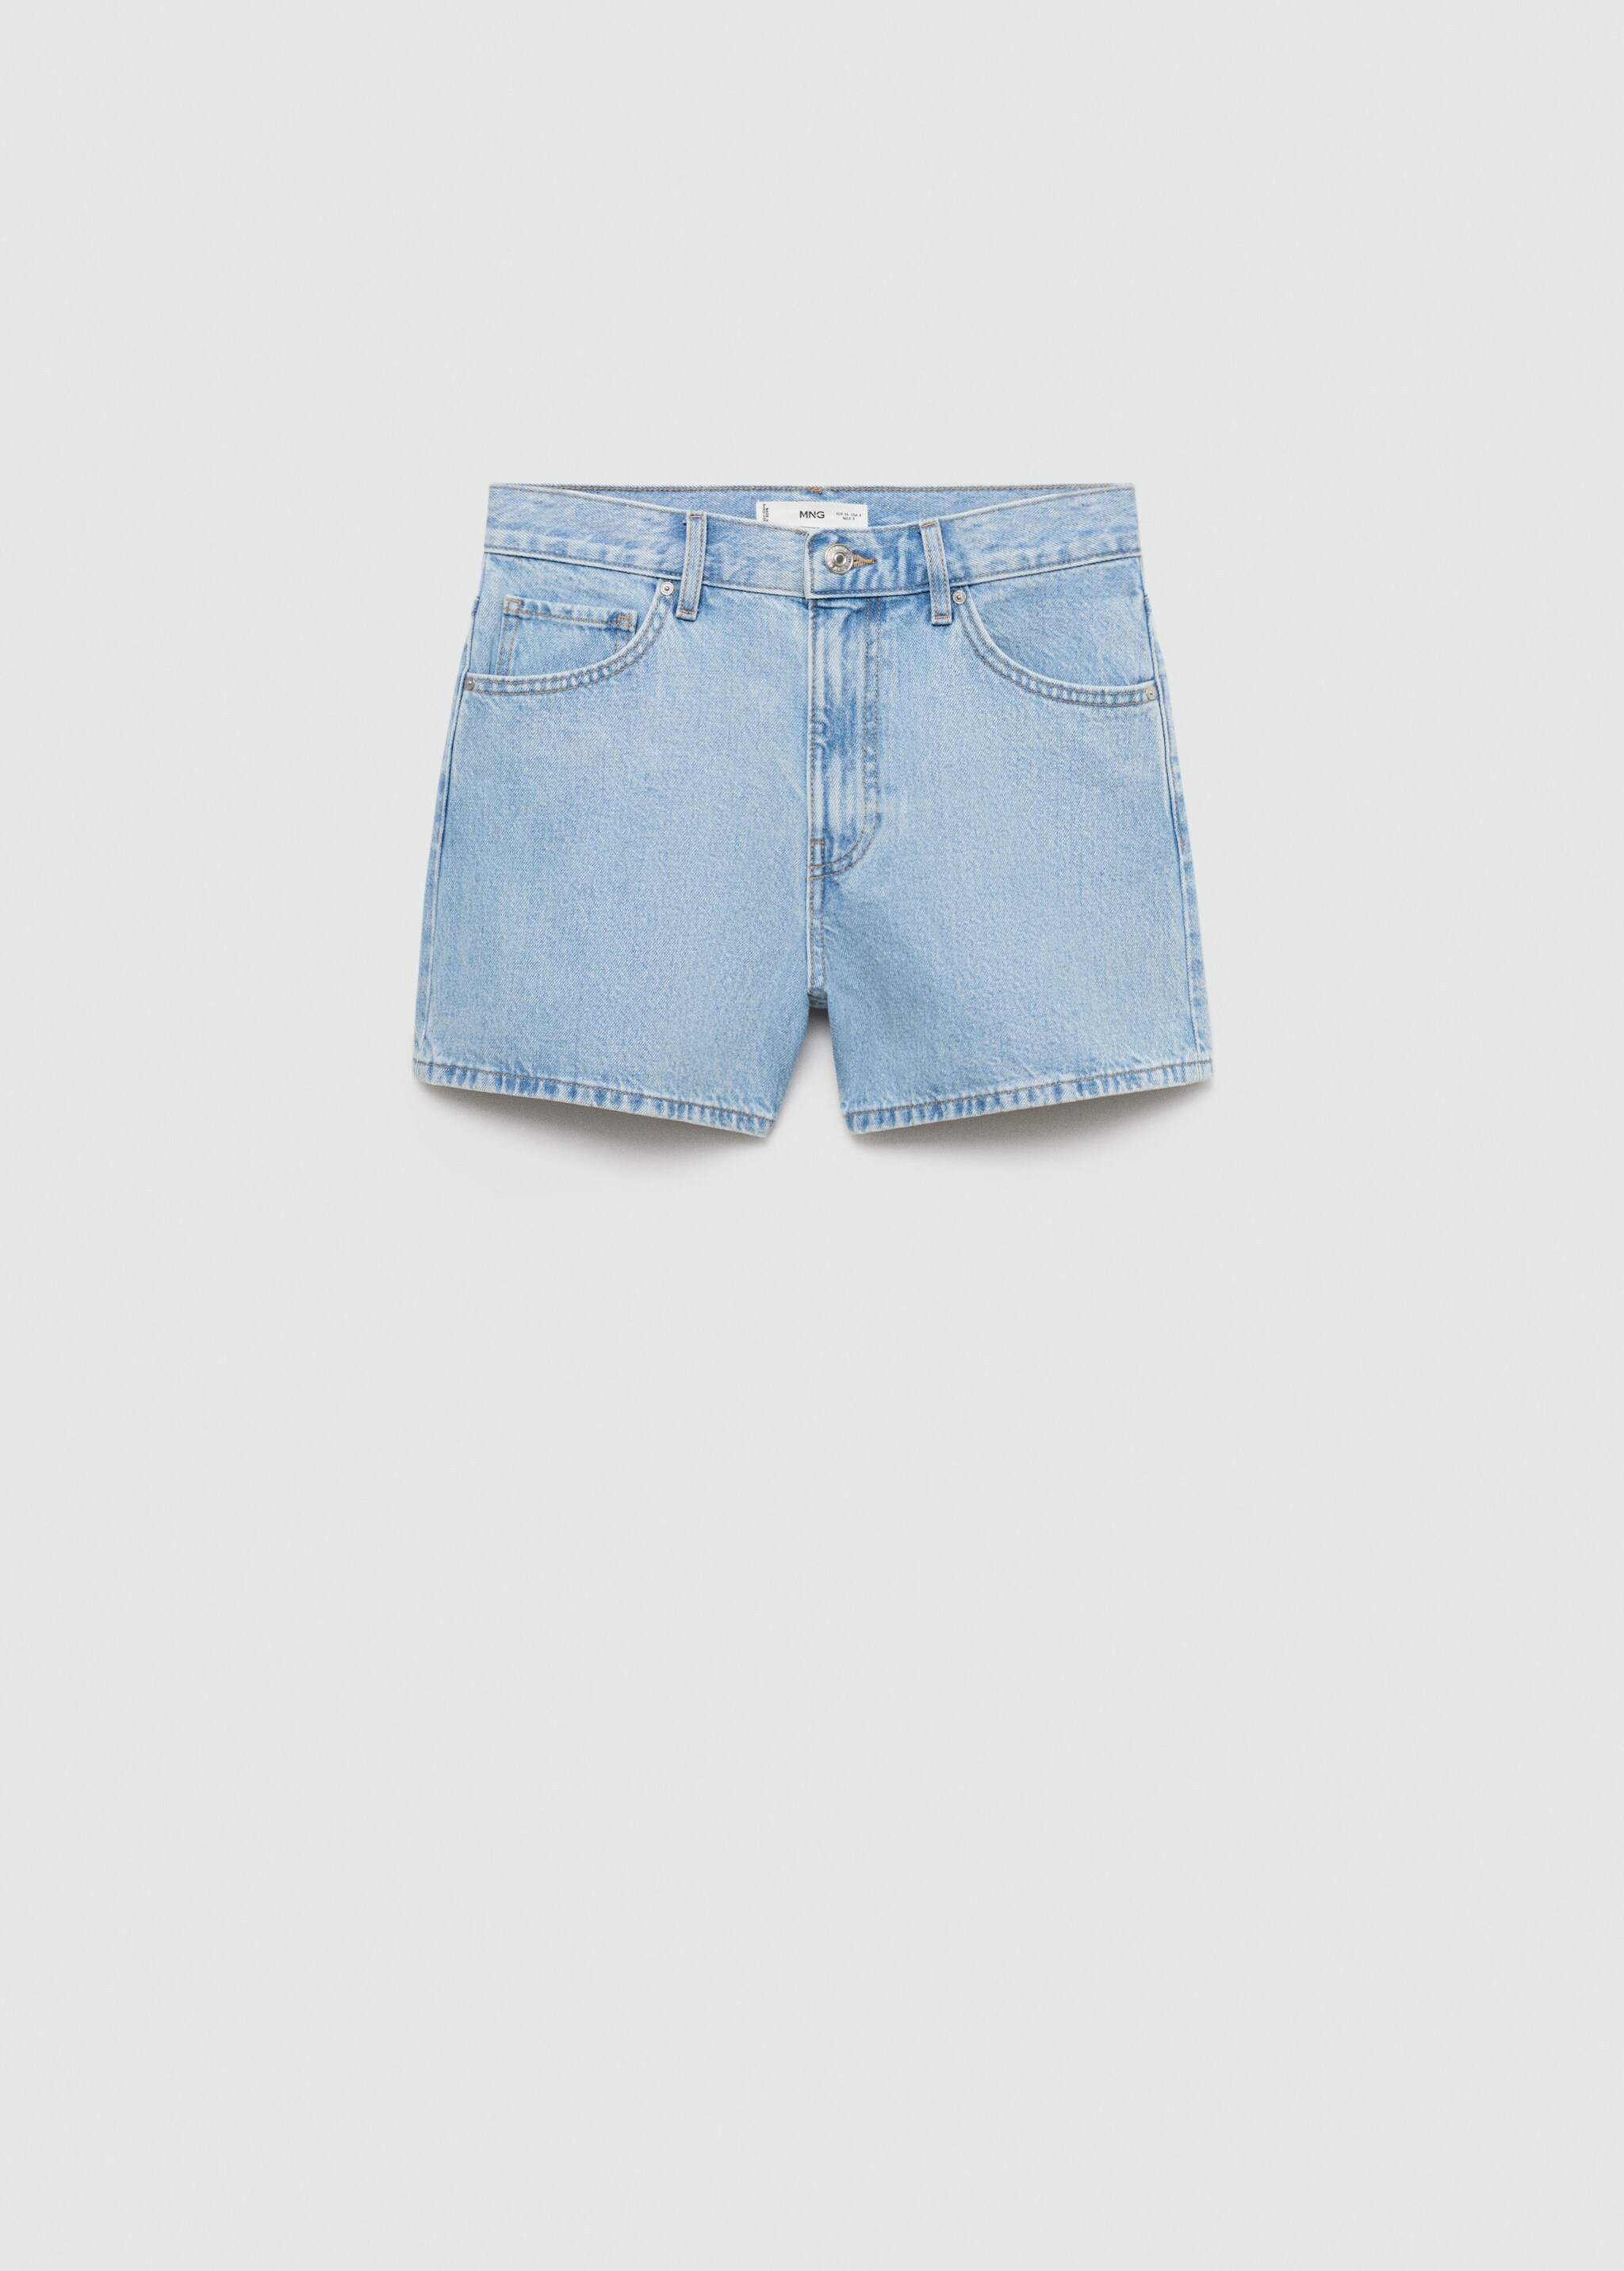 High-rise denim shorts - Article without model